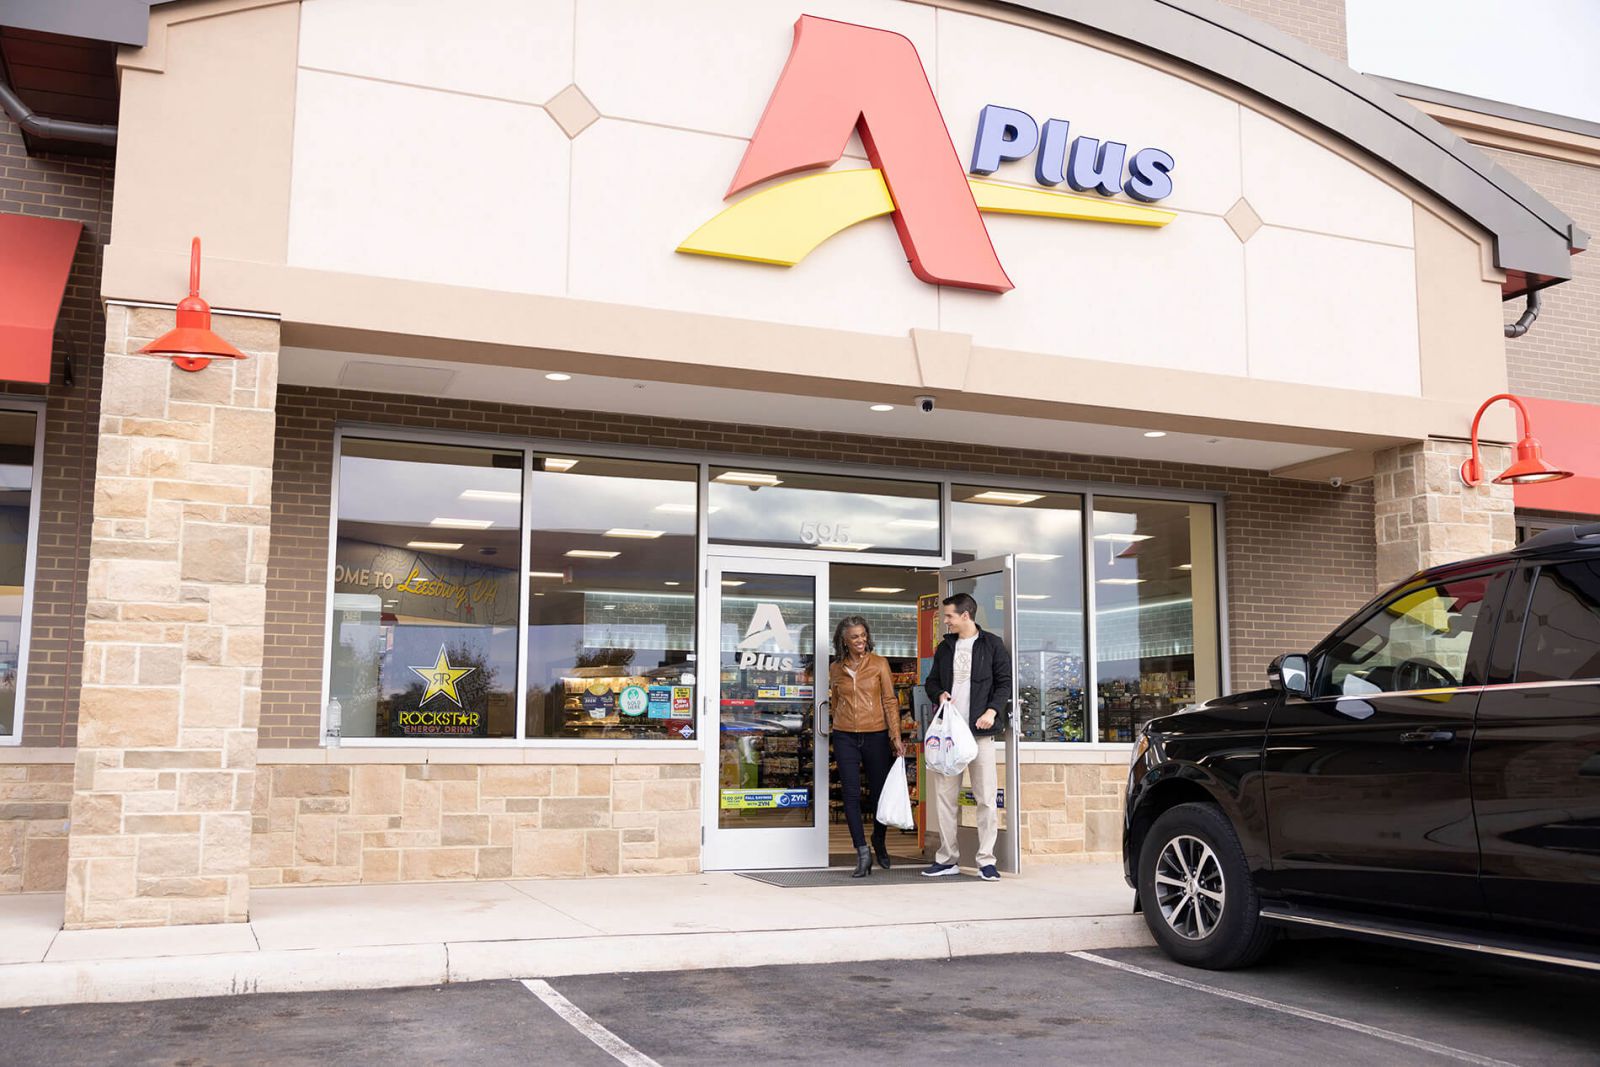 A man and a woman exiting Aplus convenience store